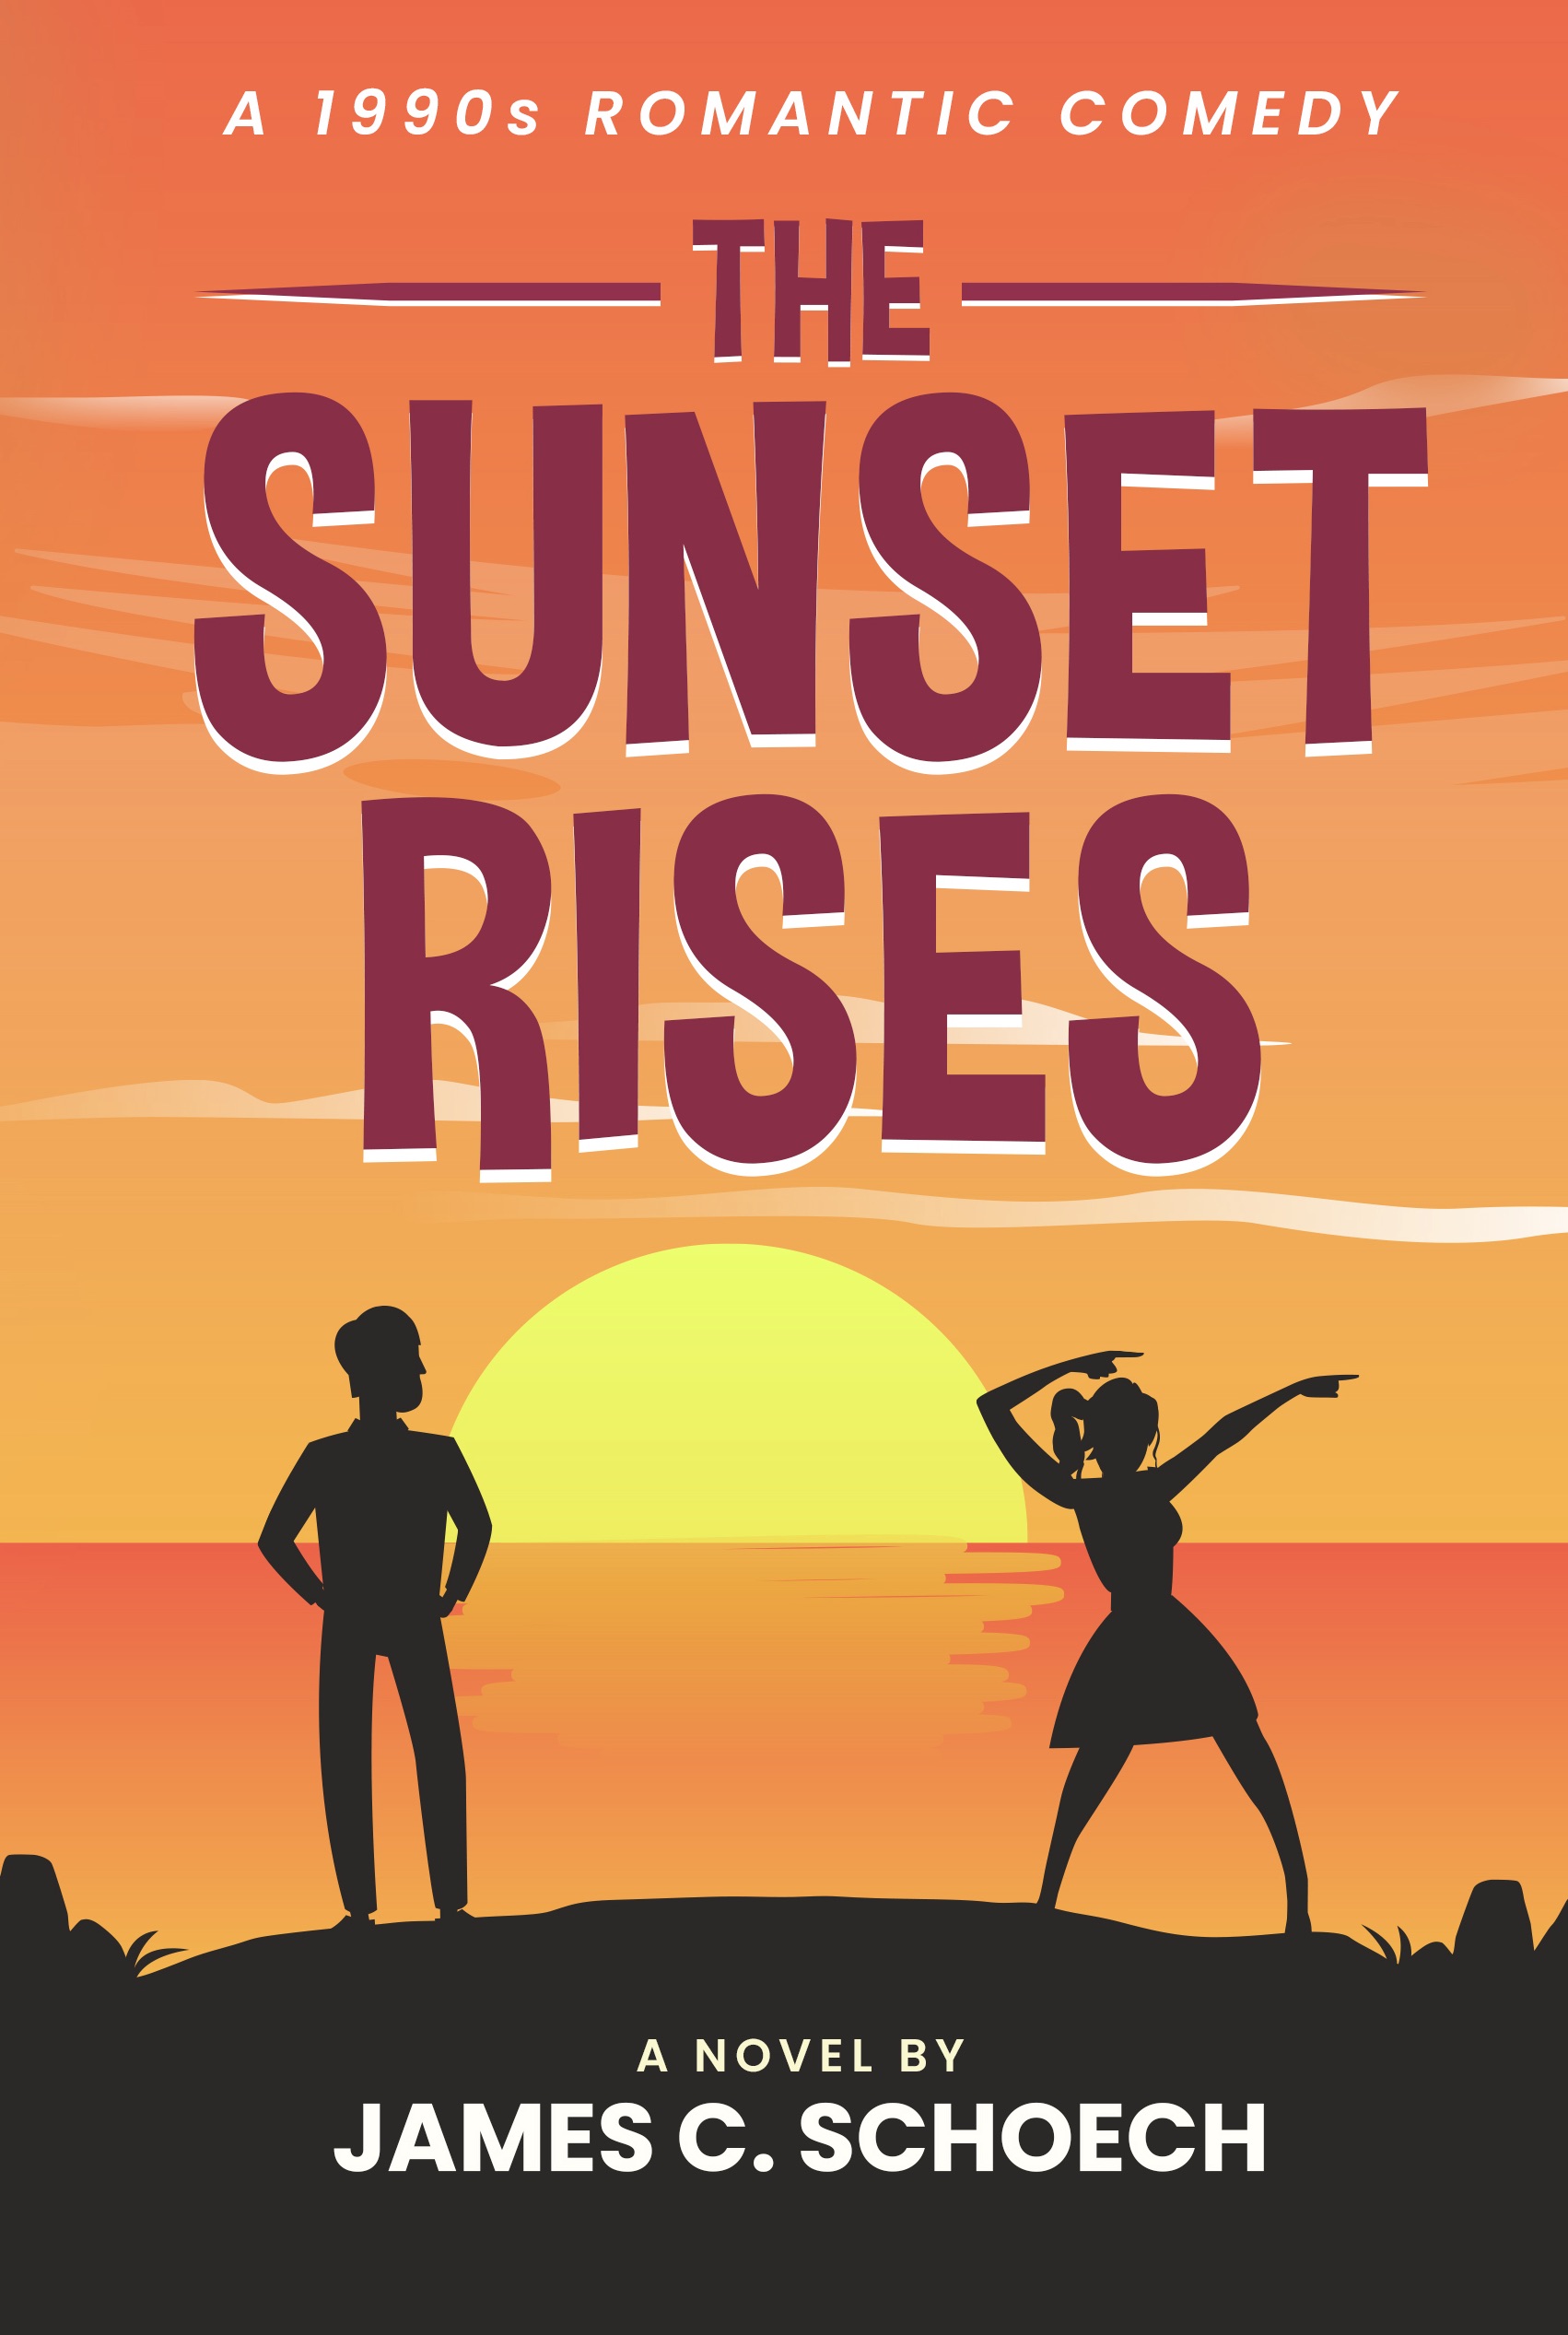 Book Cover_The Sunset Rises (RGB)_No barcode space 3